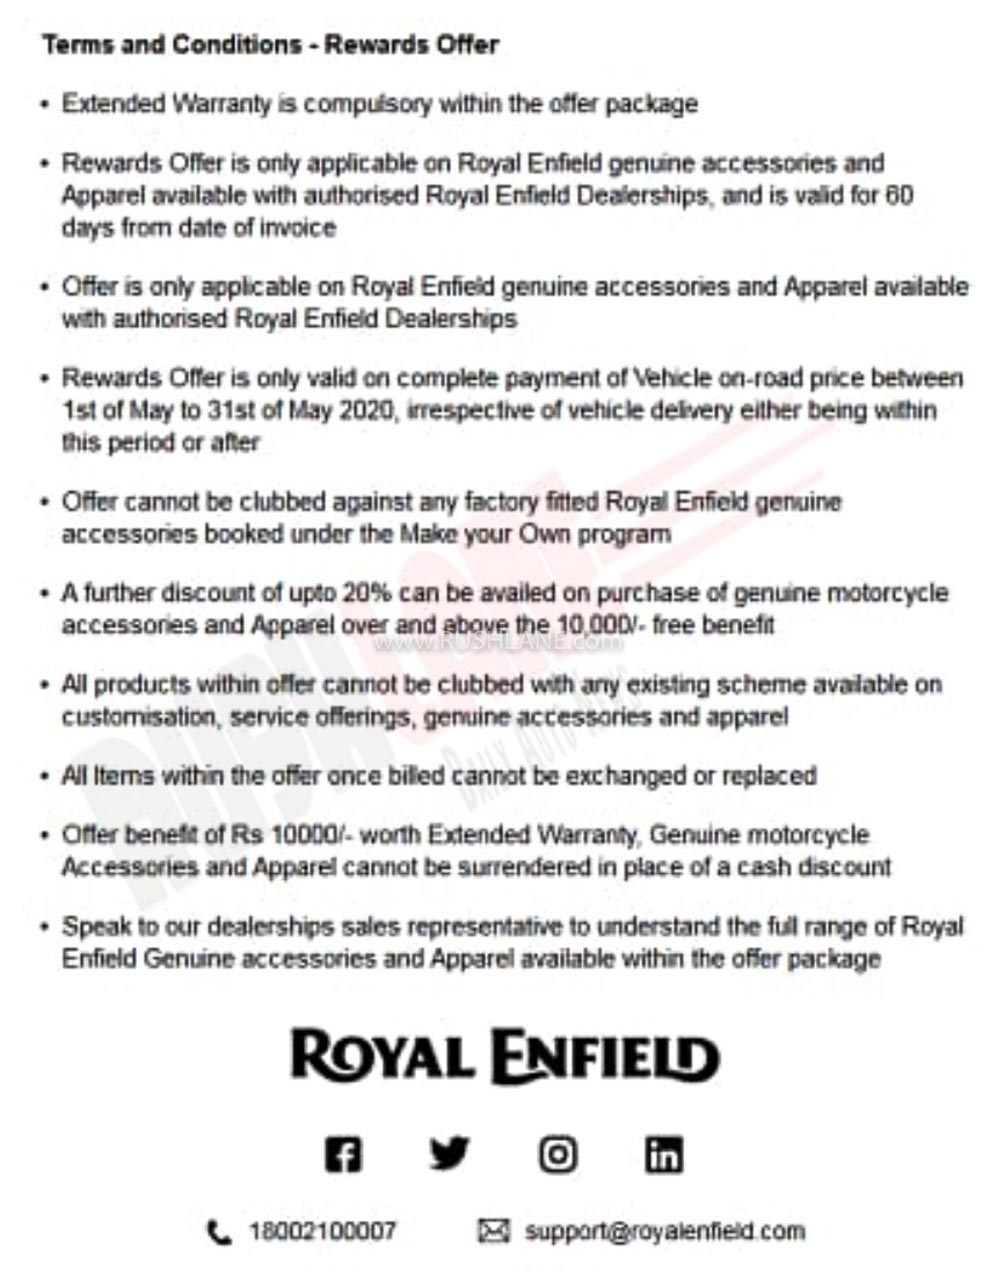 Royal Enfield Free accessories